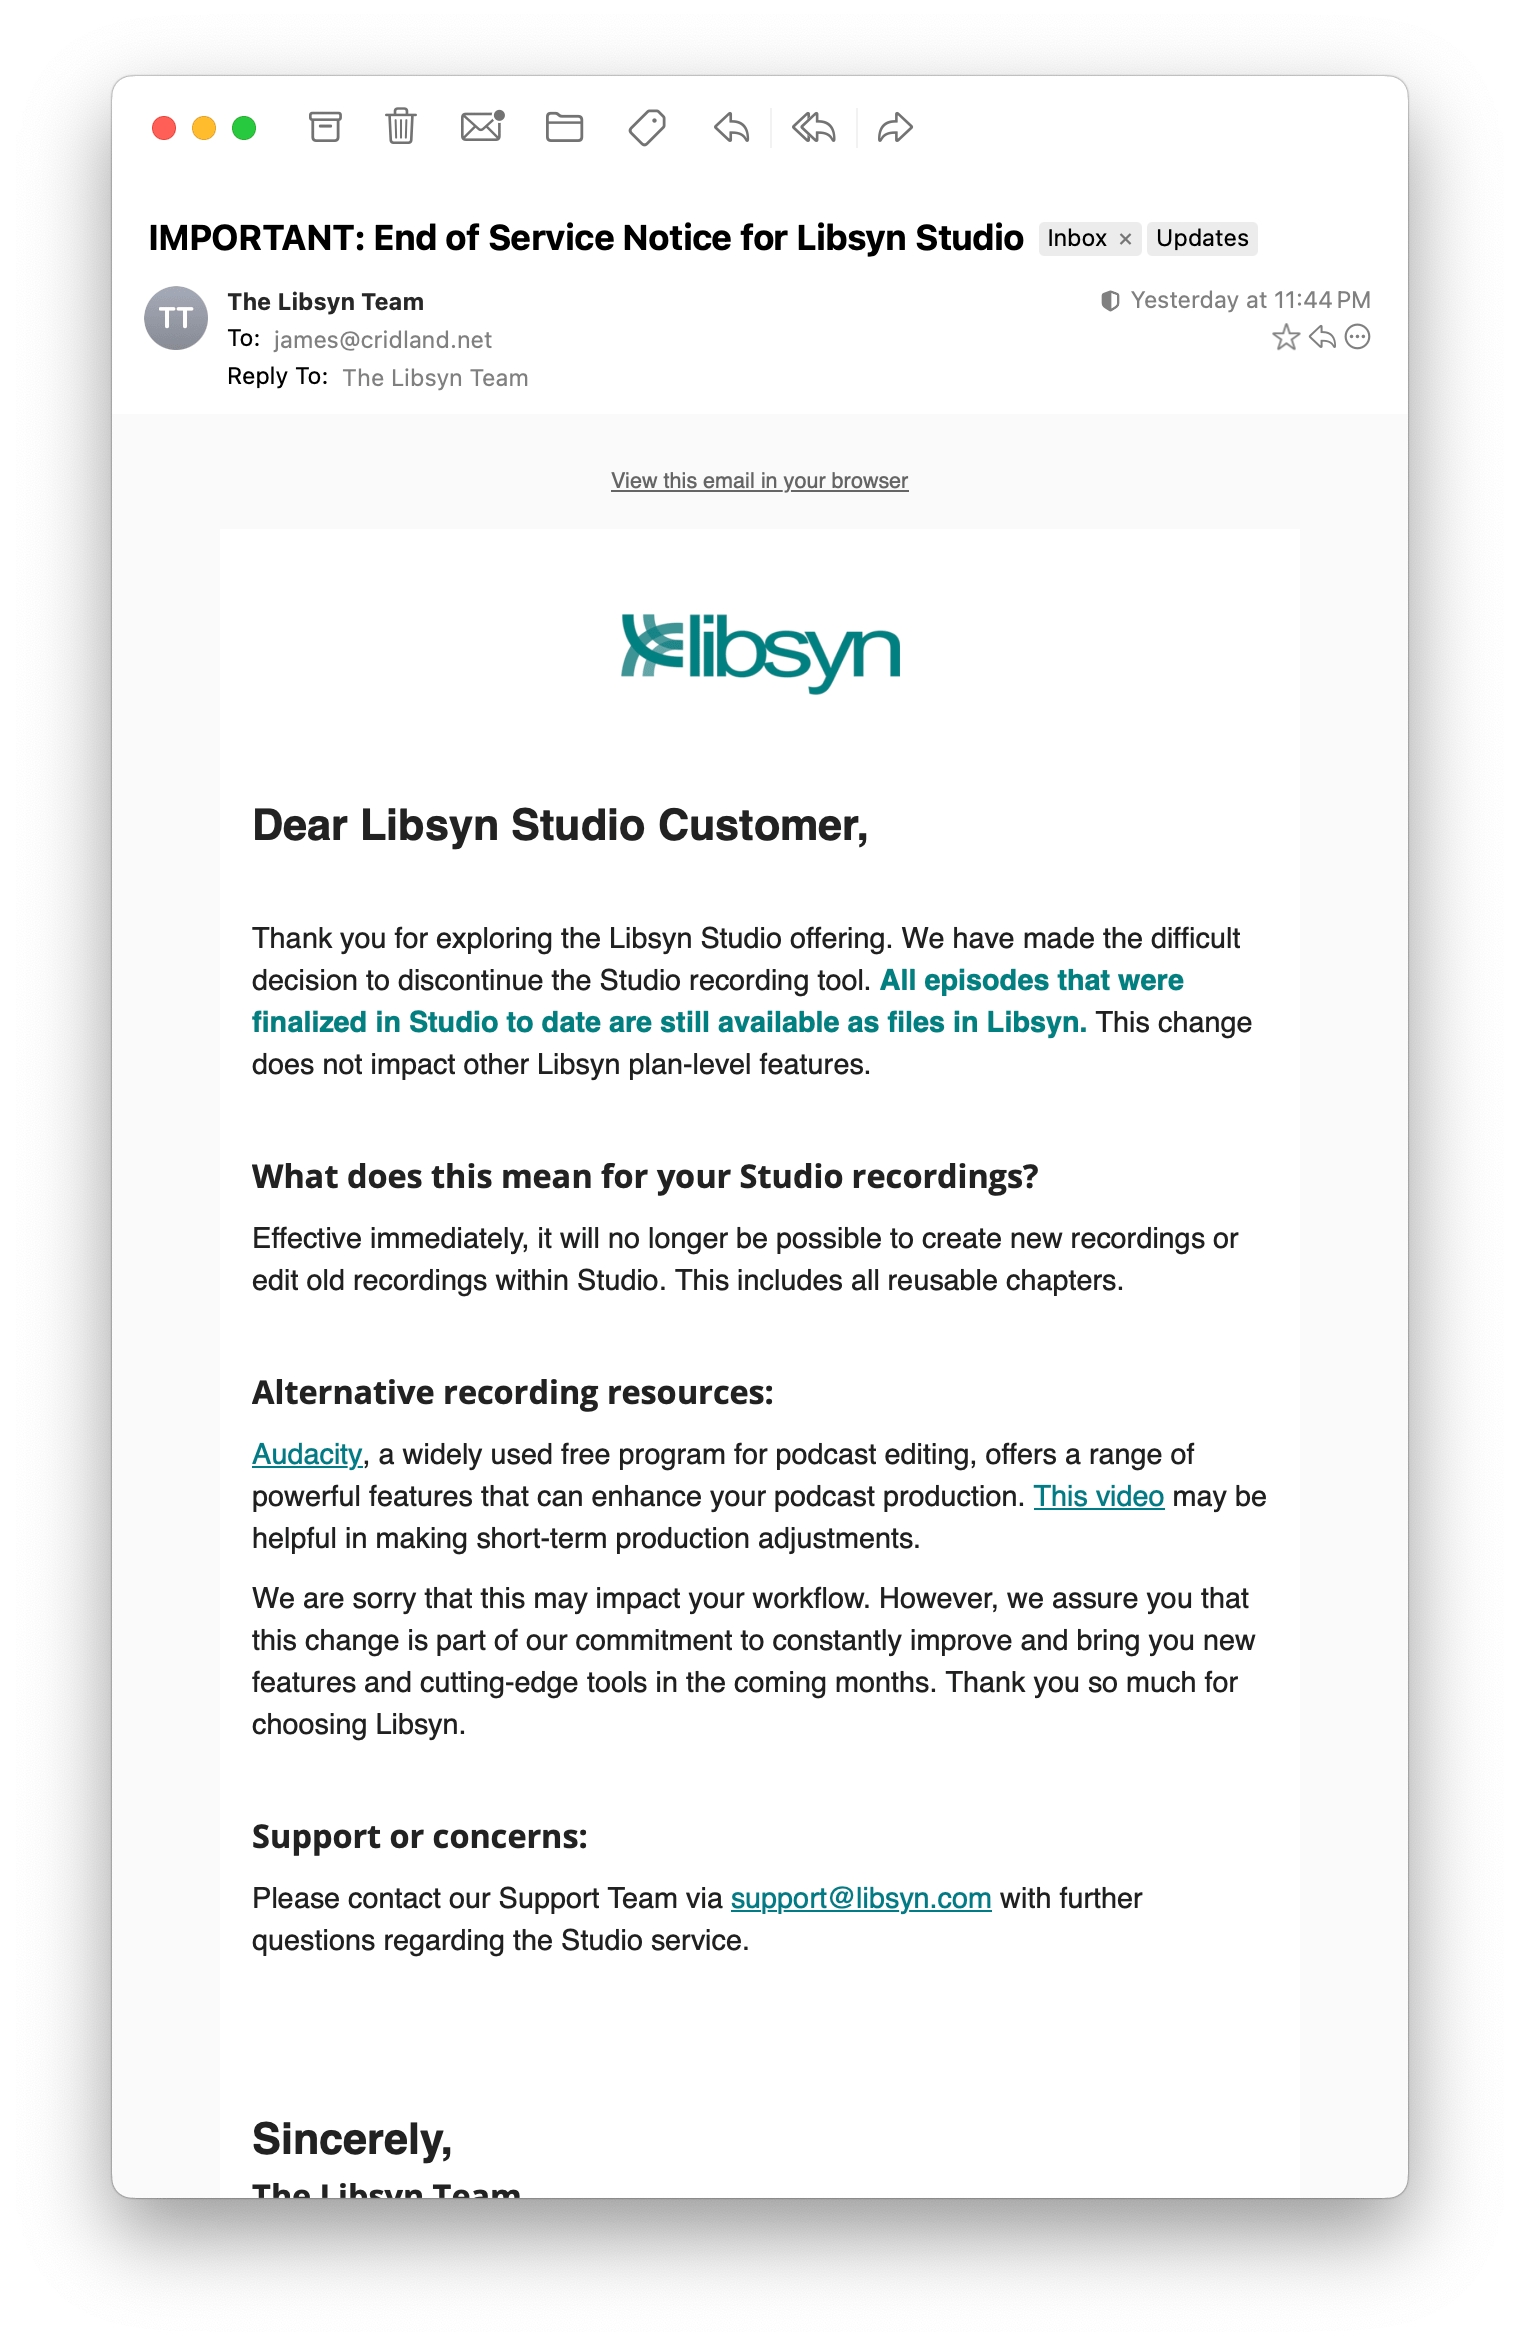 End of Service Notice for Libsyn Studio